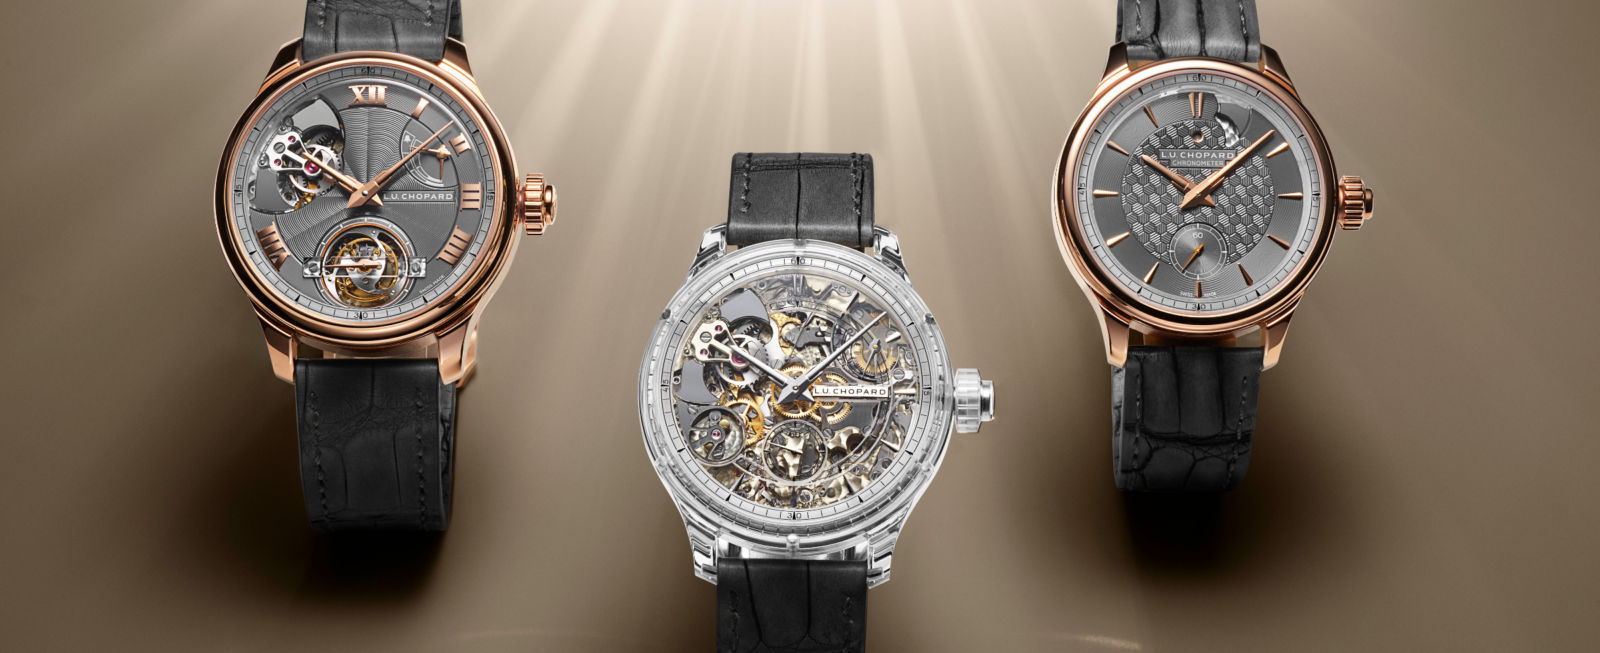 Chopard introduces show-worthy timepieces at Watches and Wonders Geneva 2022